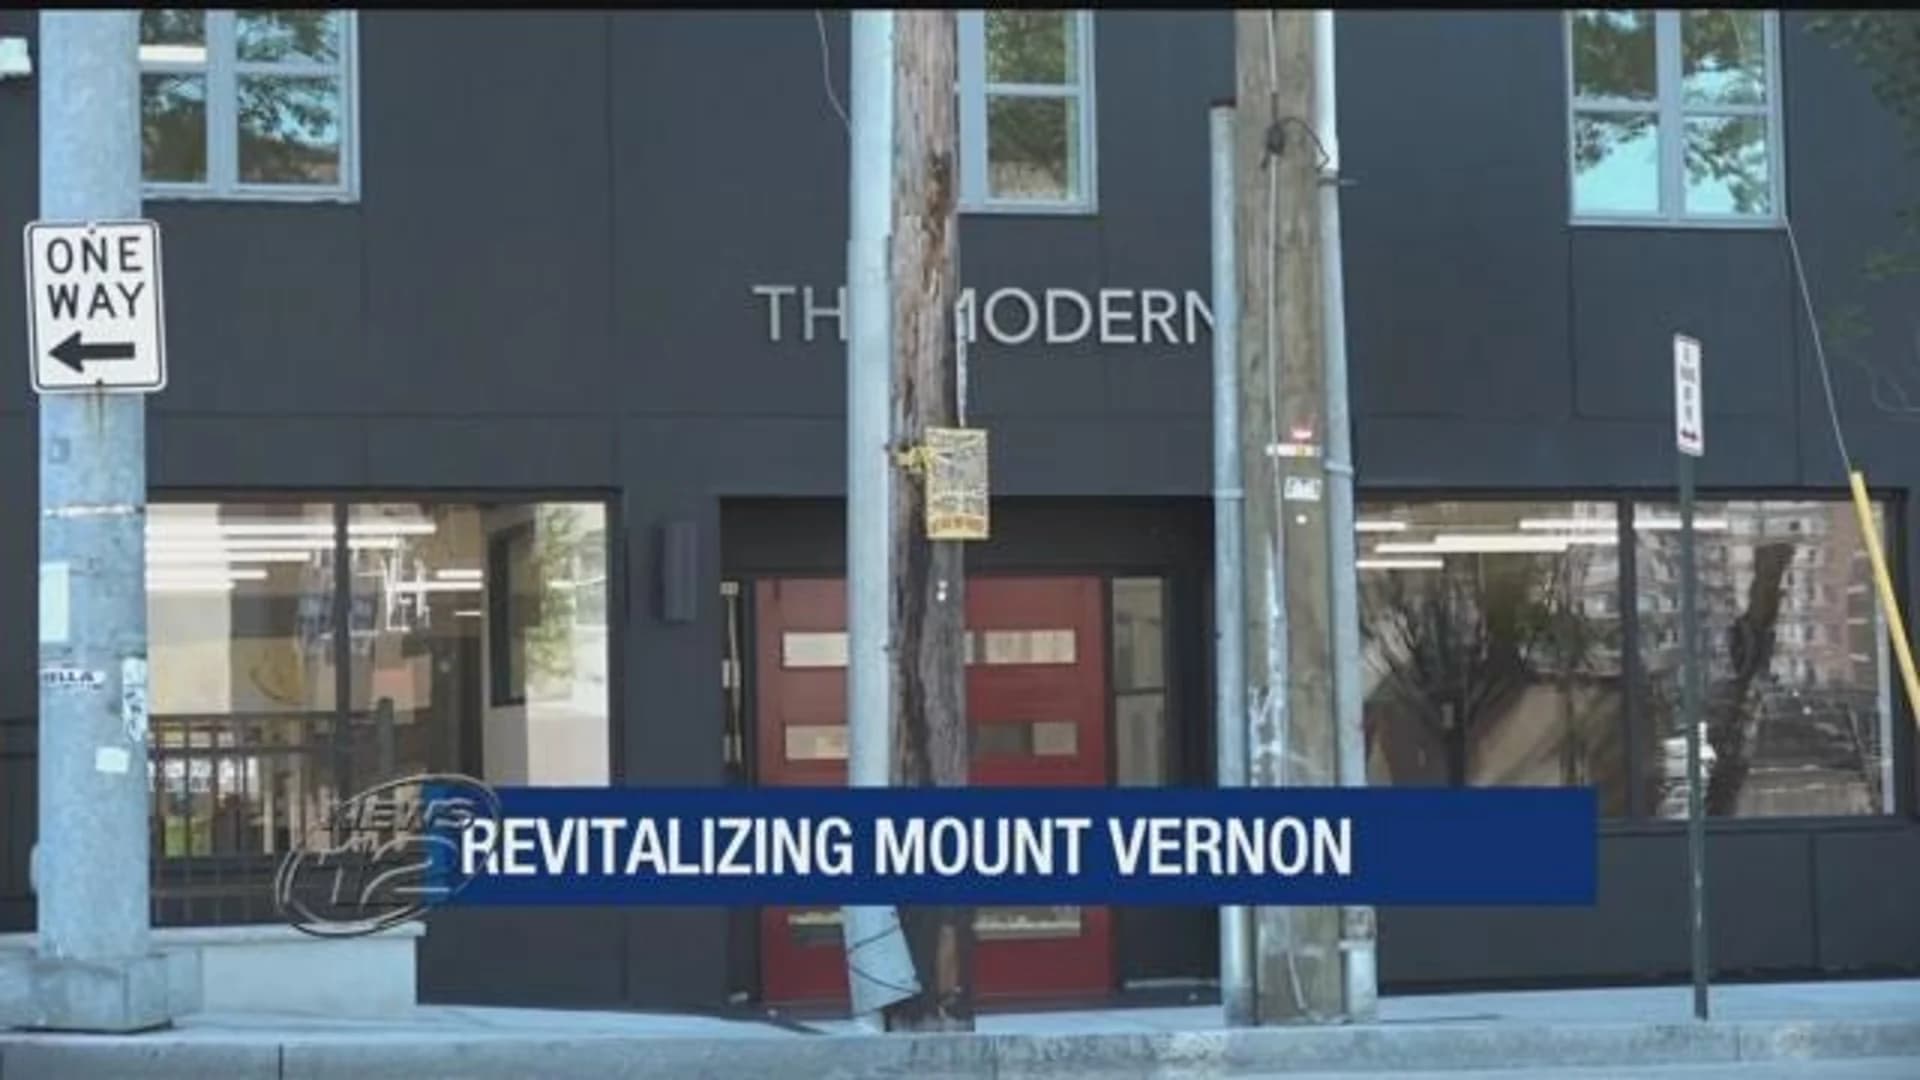 New affordable housing unit opens in Mount Vernon